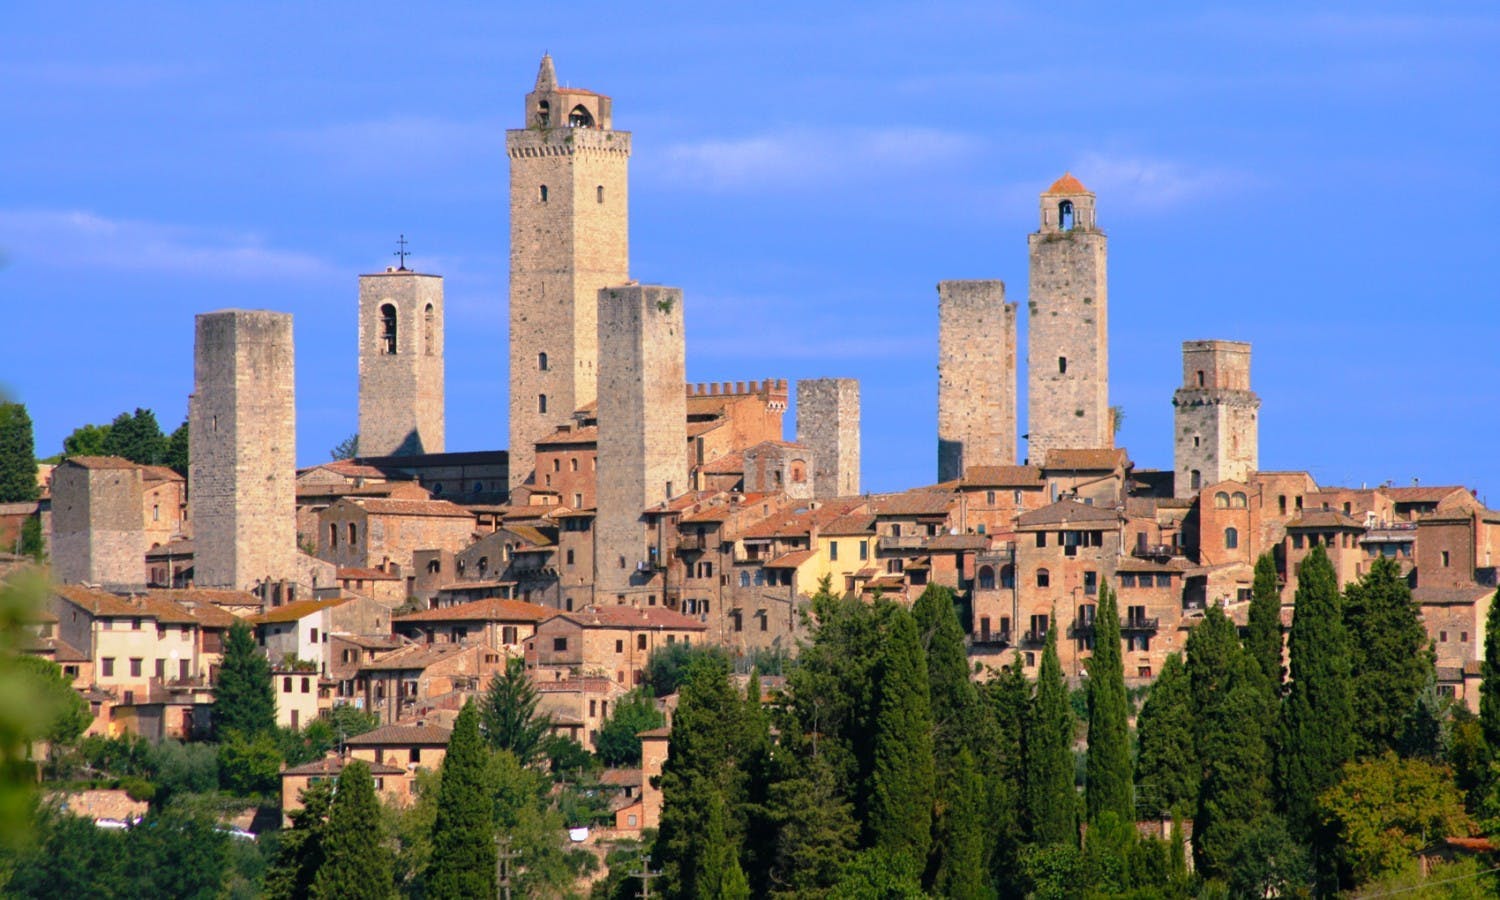 pisa-siena-san-gimignano-and-chianti-guided-tour-with-lunch-and-wine-tasting_header-4497.jpeg